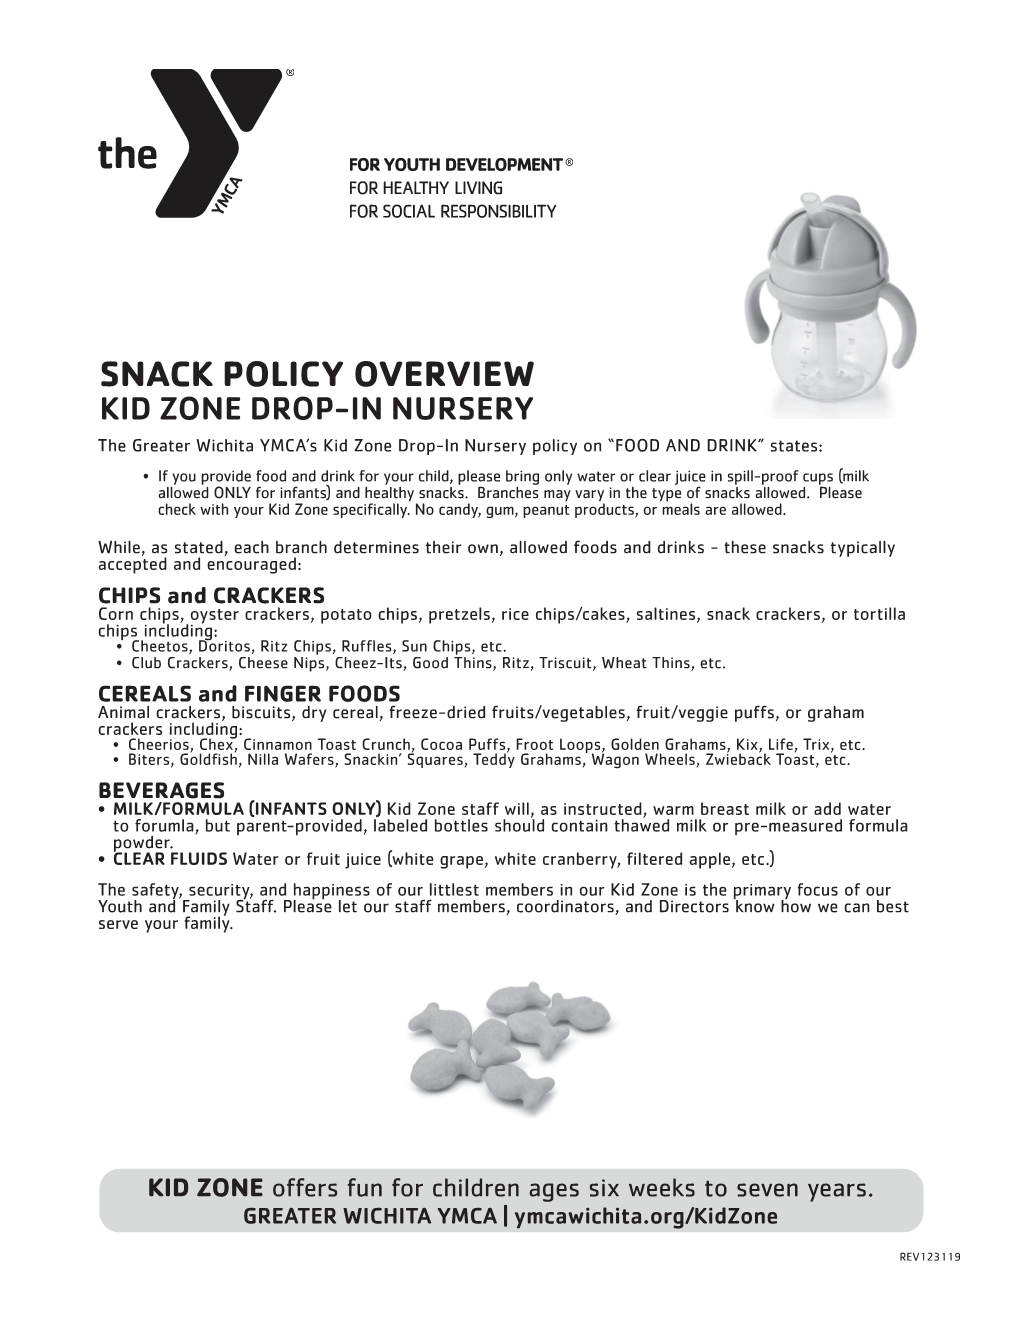 Snack Policy Overview